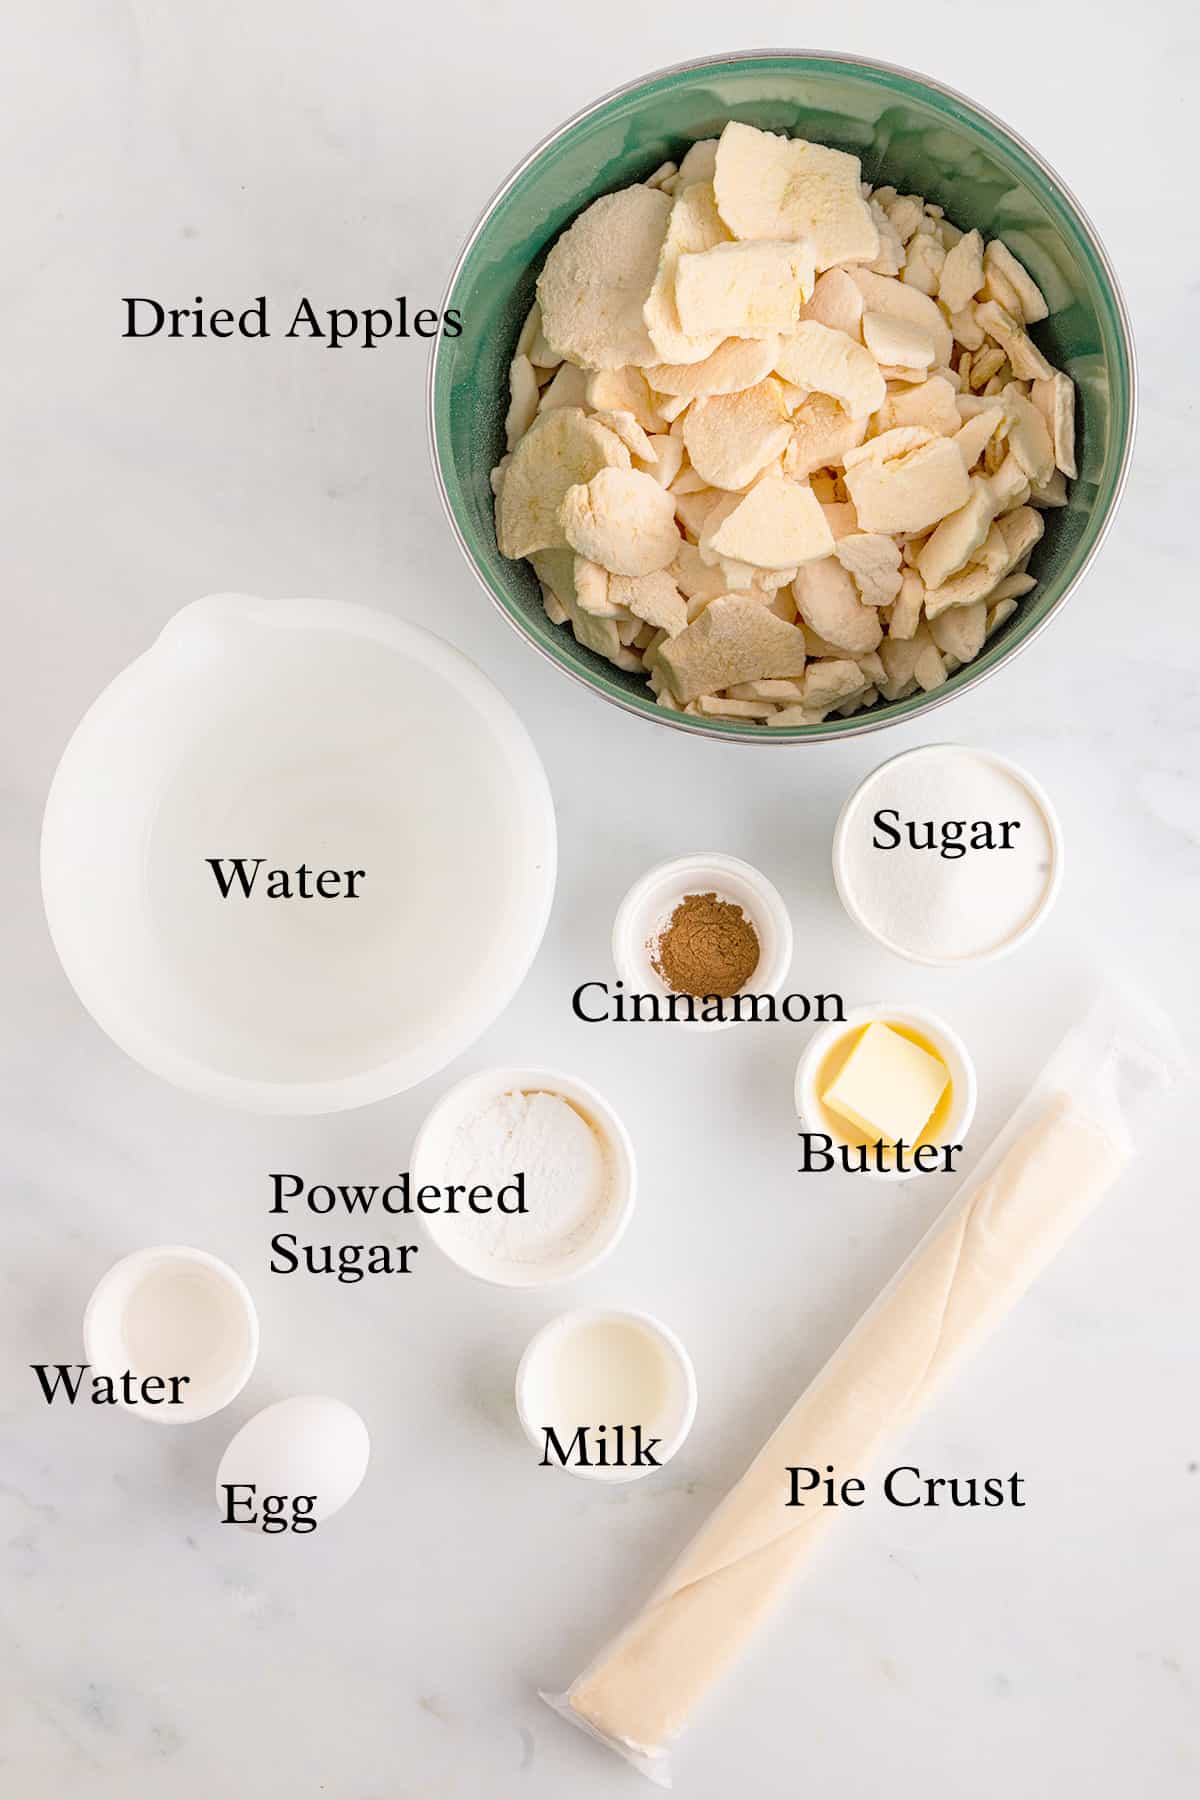 Ingredients needed for making this recipe.